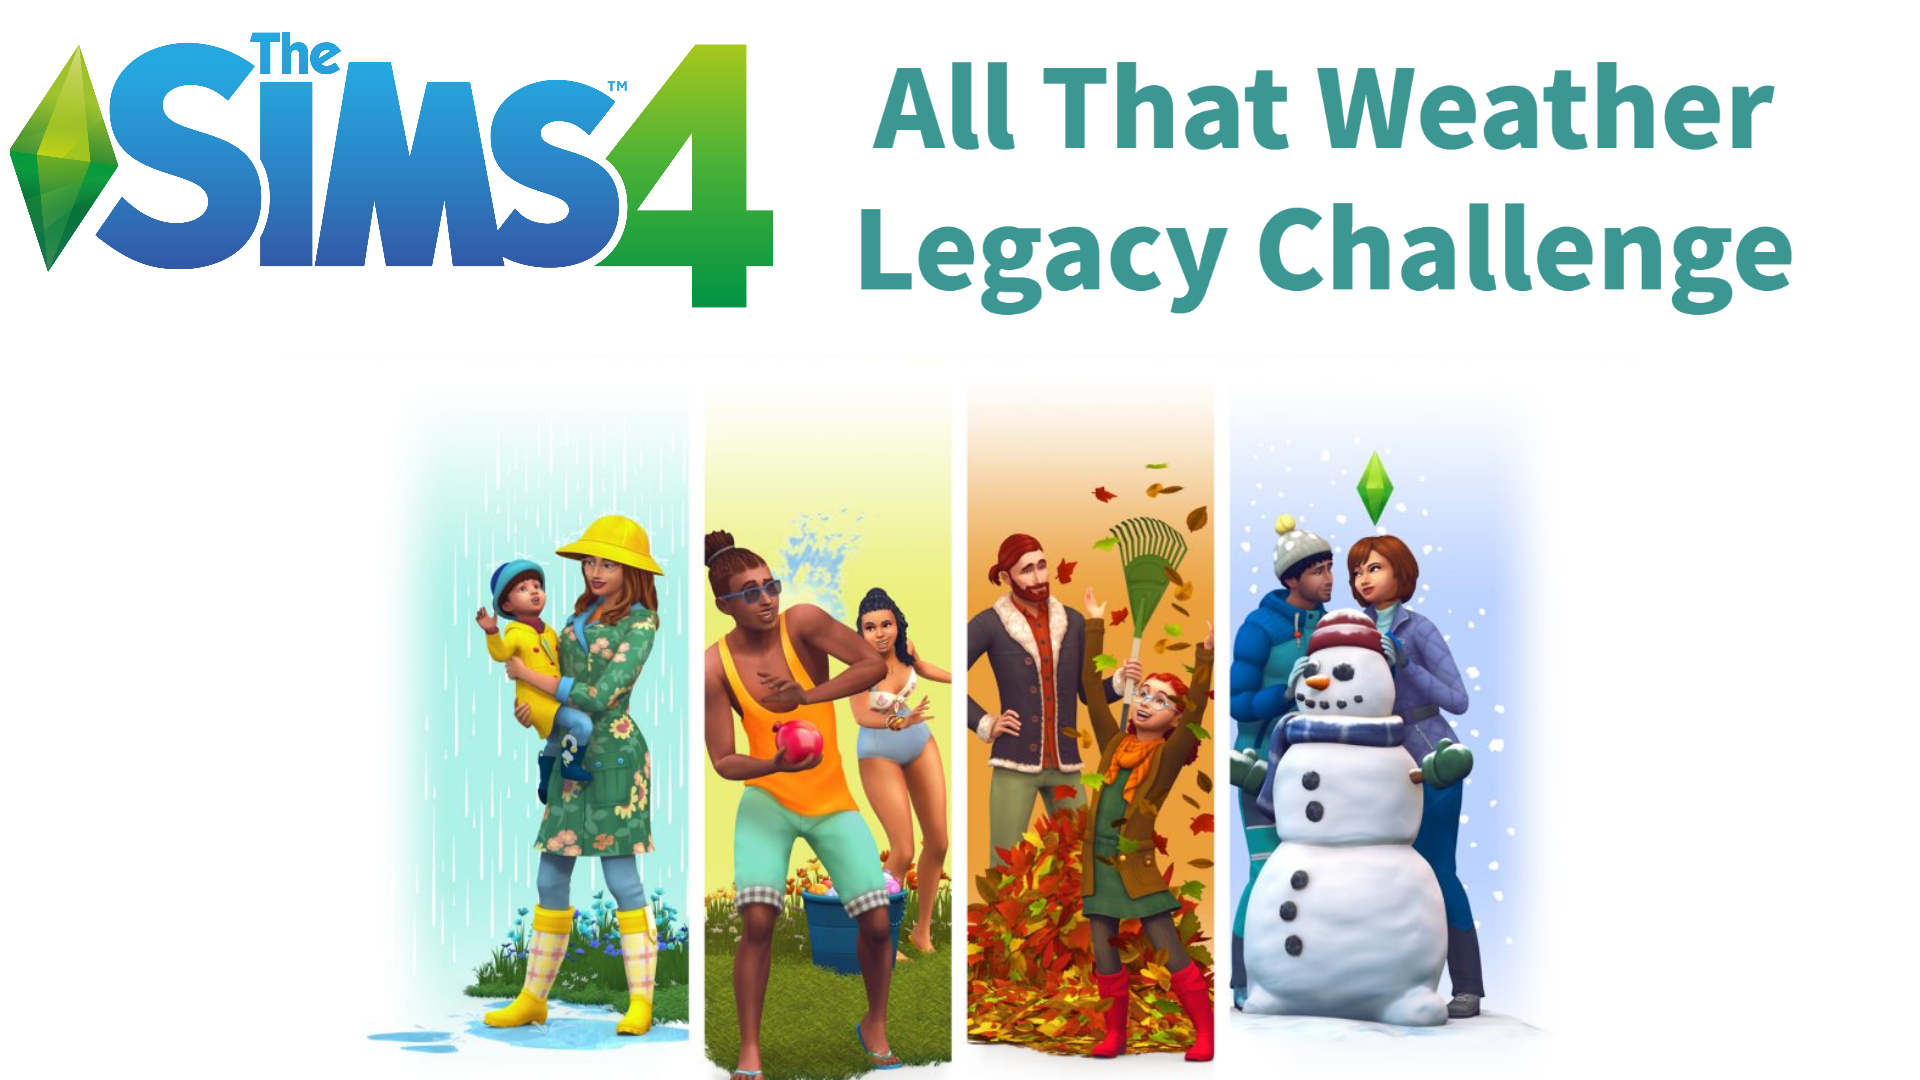 All That Weather Legacy Challenge